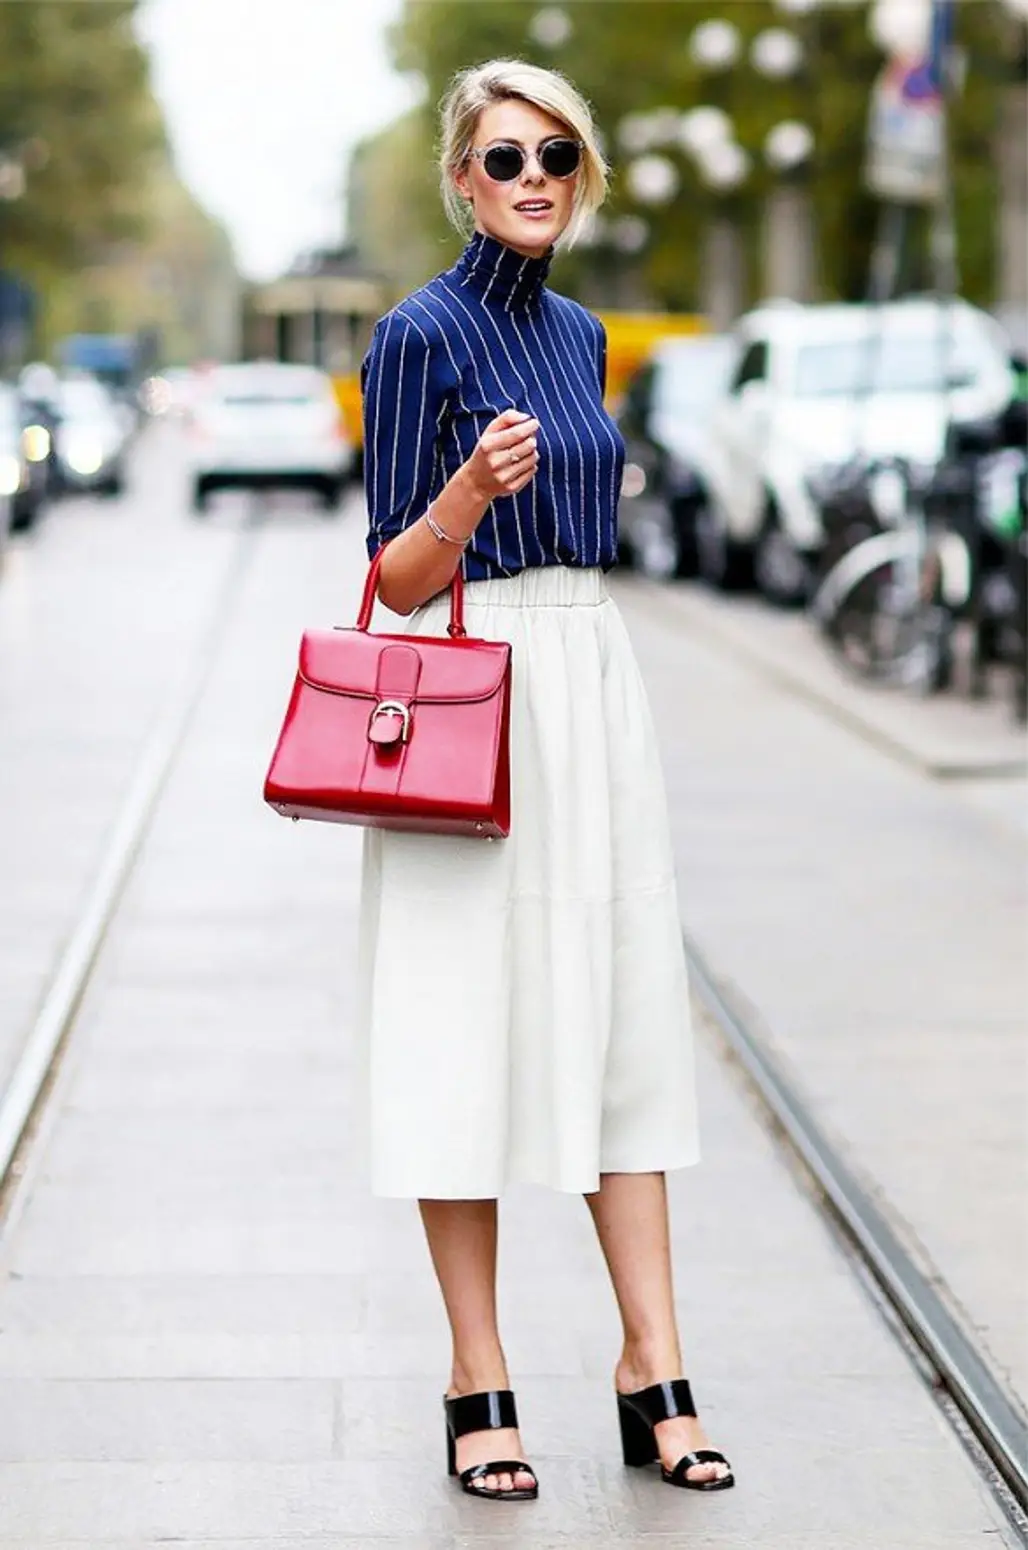 Striped Turtleneck Top with a White Skirt